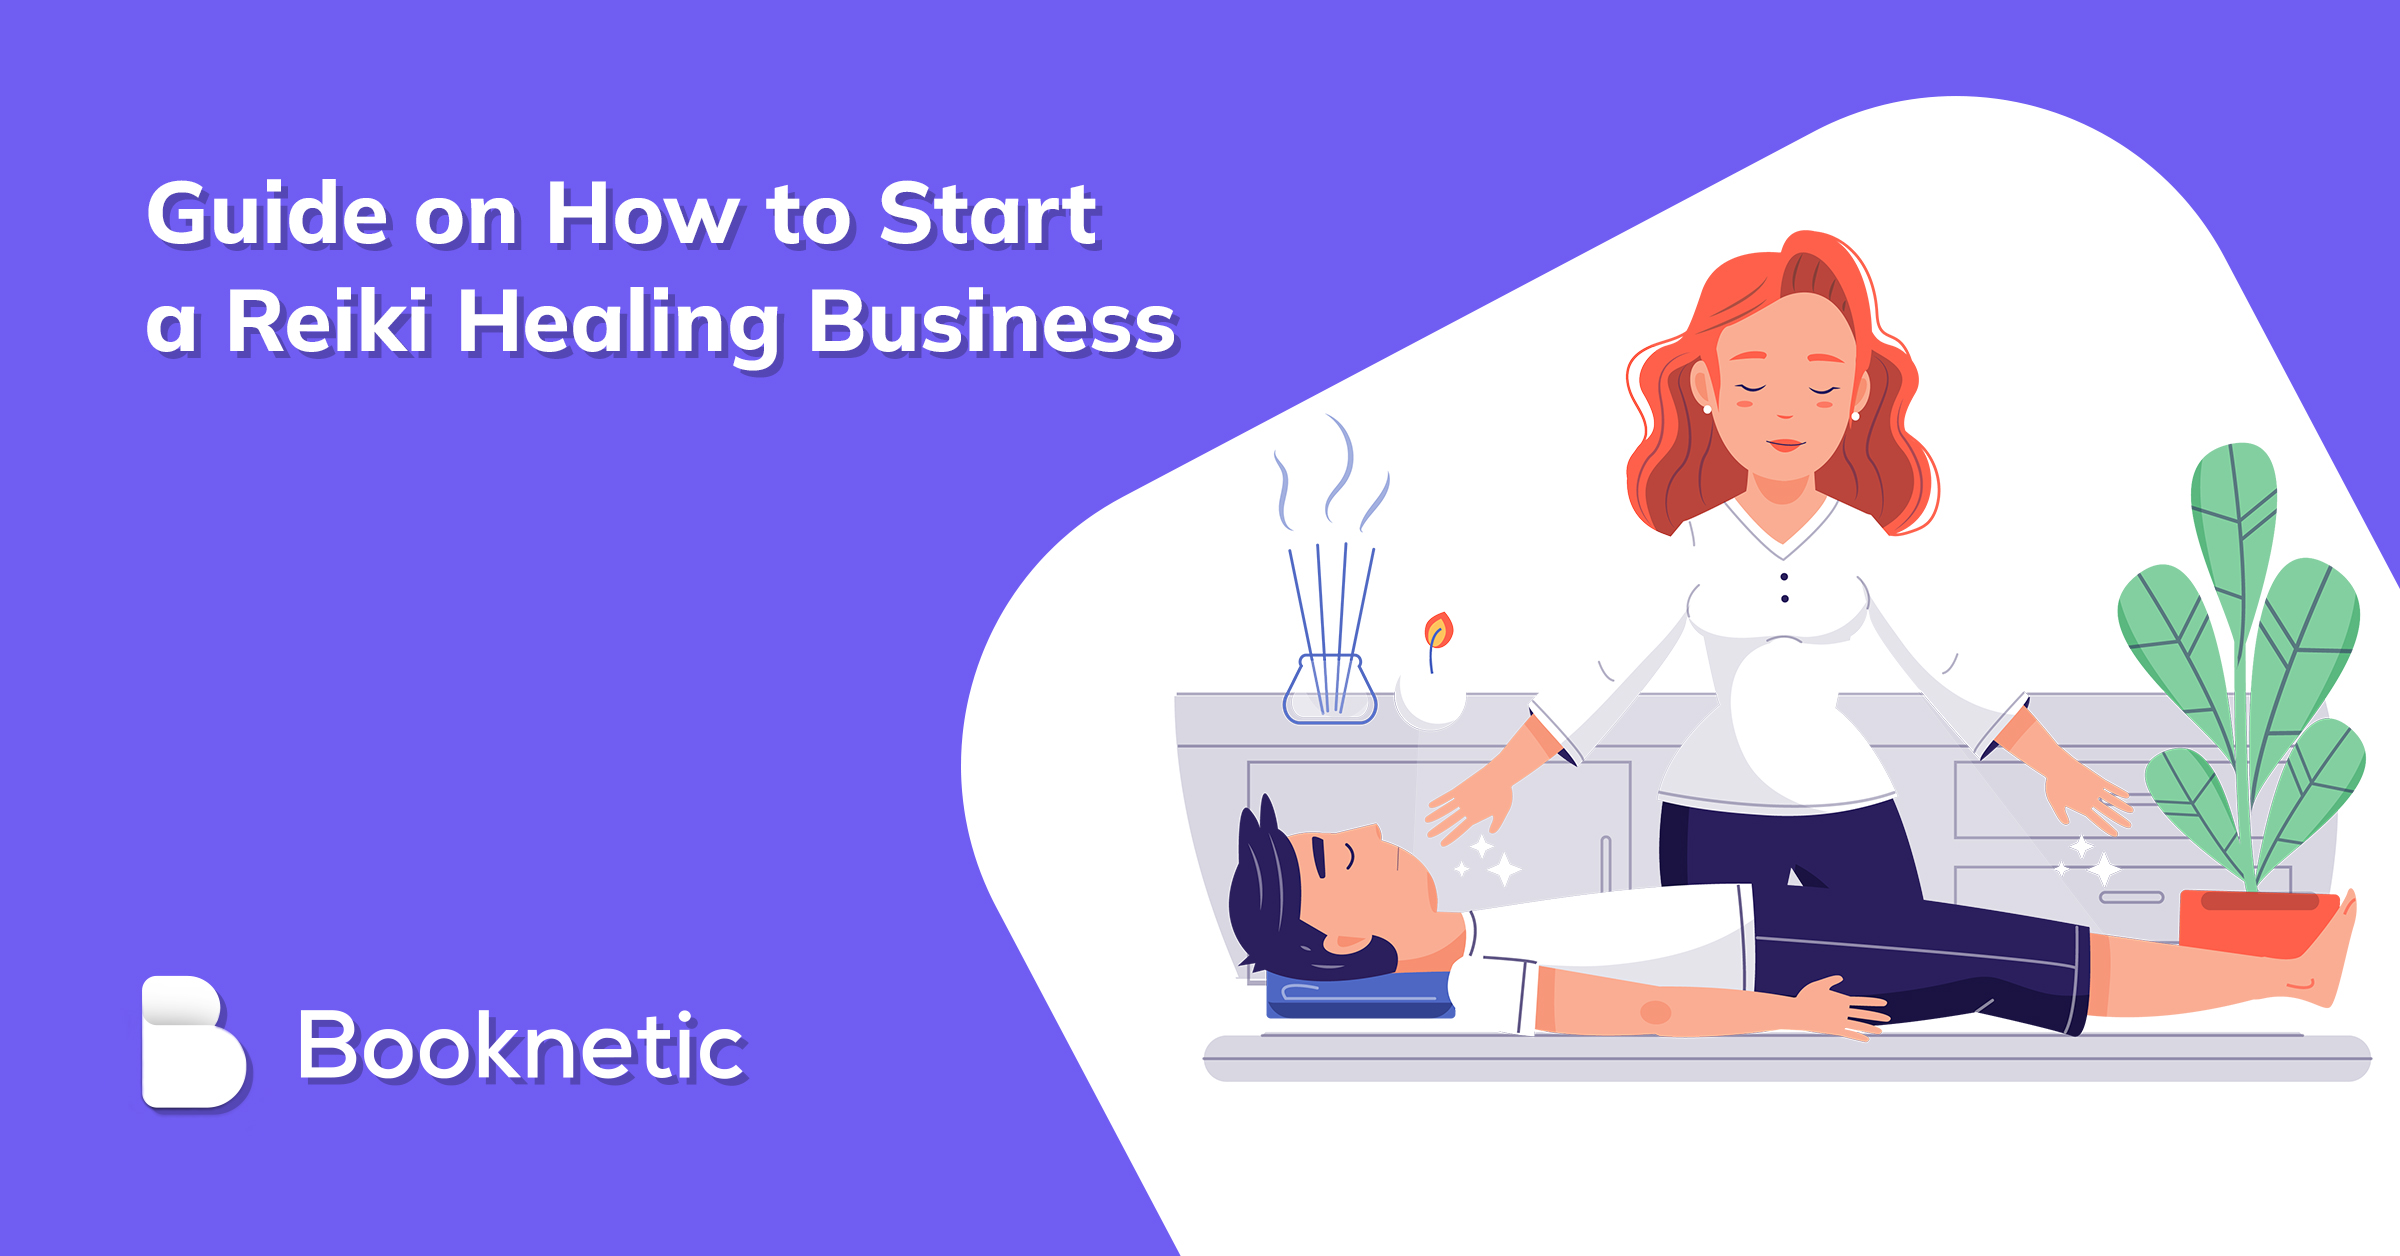 11 step Guide on How to Start a Reiki Healing Business